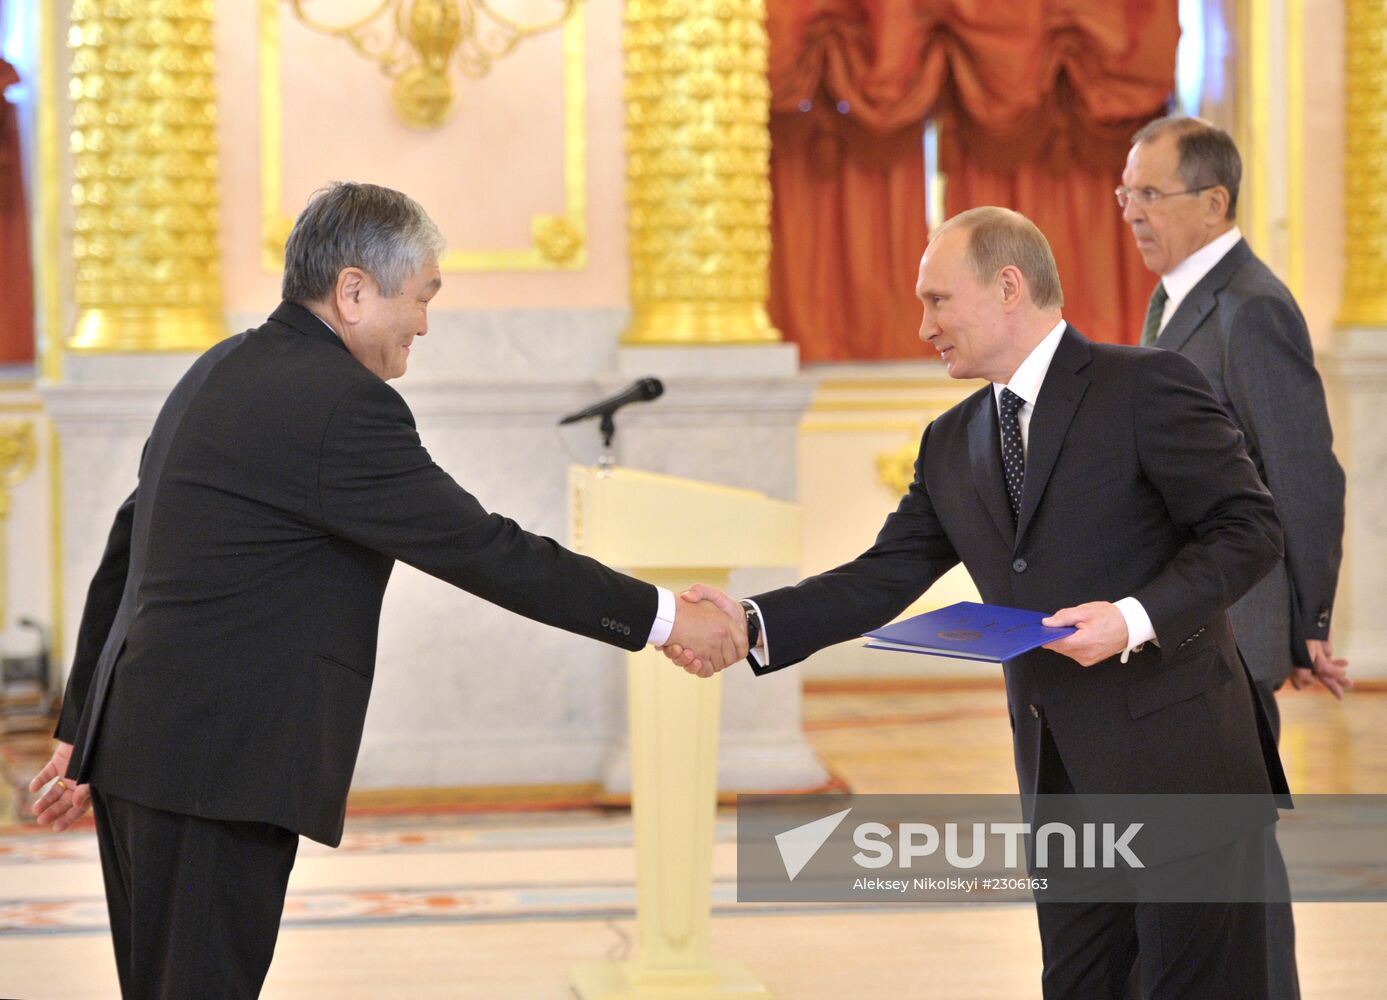 Ceremony of presenting credentials to Russian President Vladimir Putin at the Grand Kremlin Palace